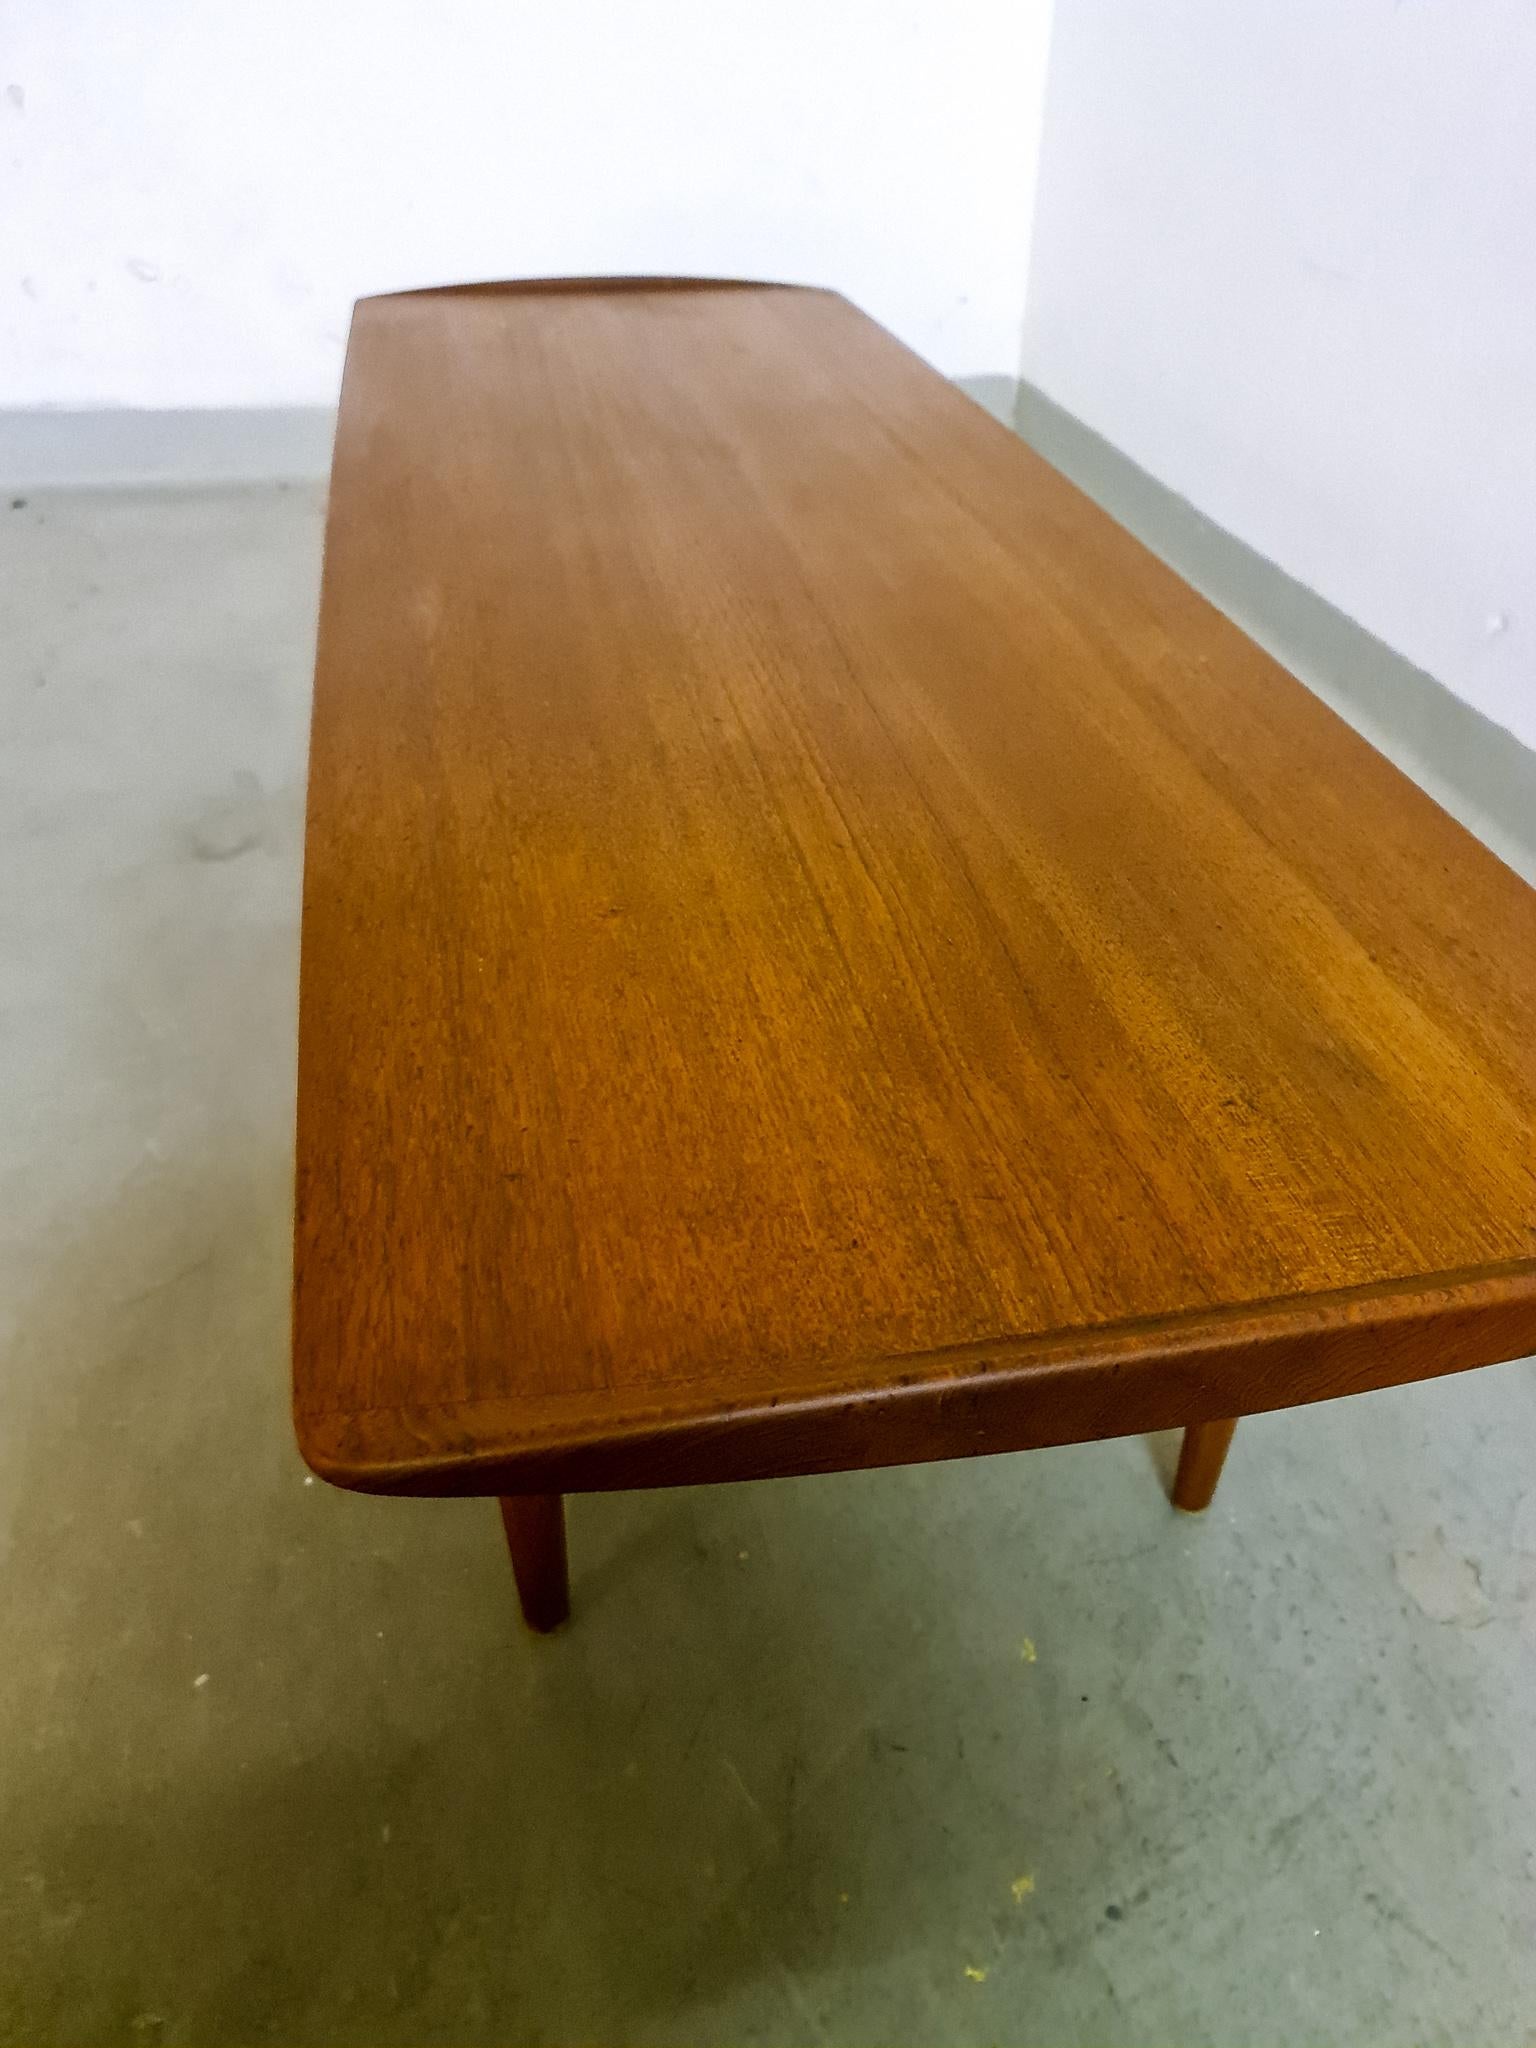 Midcentury Coffee Table by Kindt-Larsen for France and Daverkosen Denmark, 1960s In Good Condition For Sale In Hillringsberg, SE